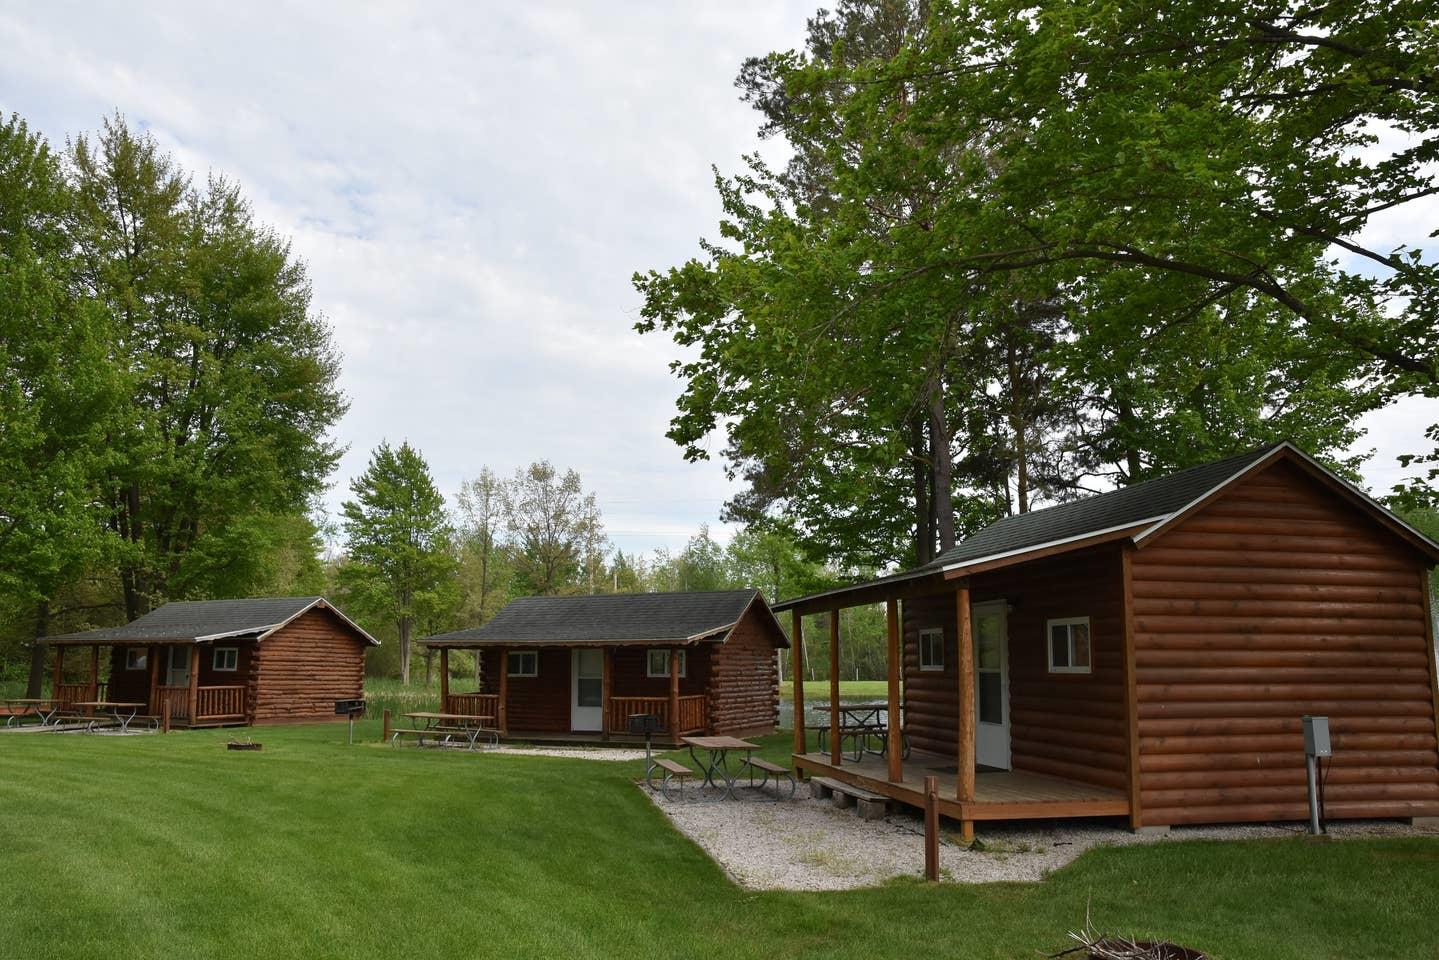 exterior of three rustic cabins by pond